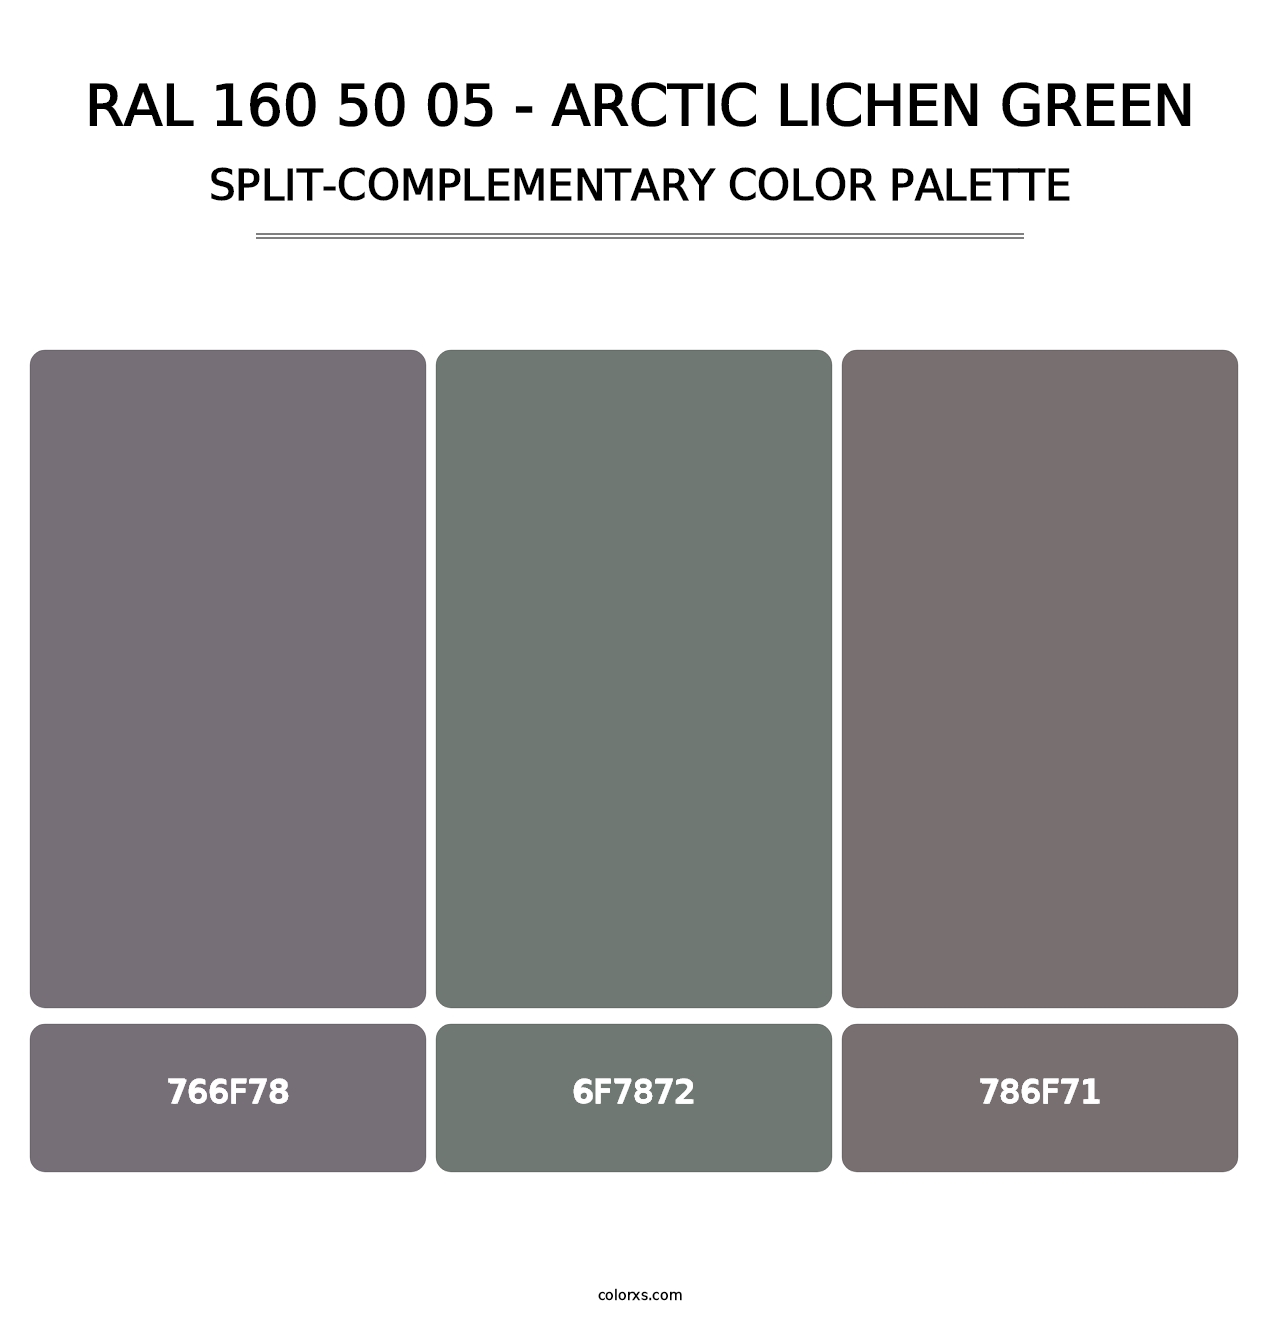 RAL 160 50 05 - Arctic Lichen Green - Split-Complementary Color Palette